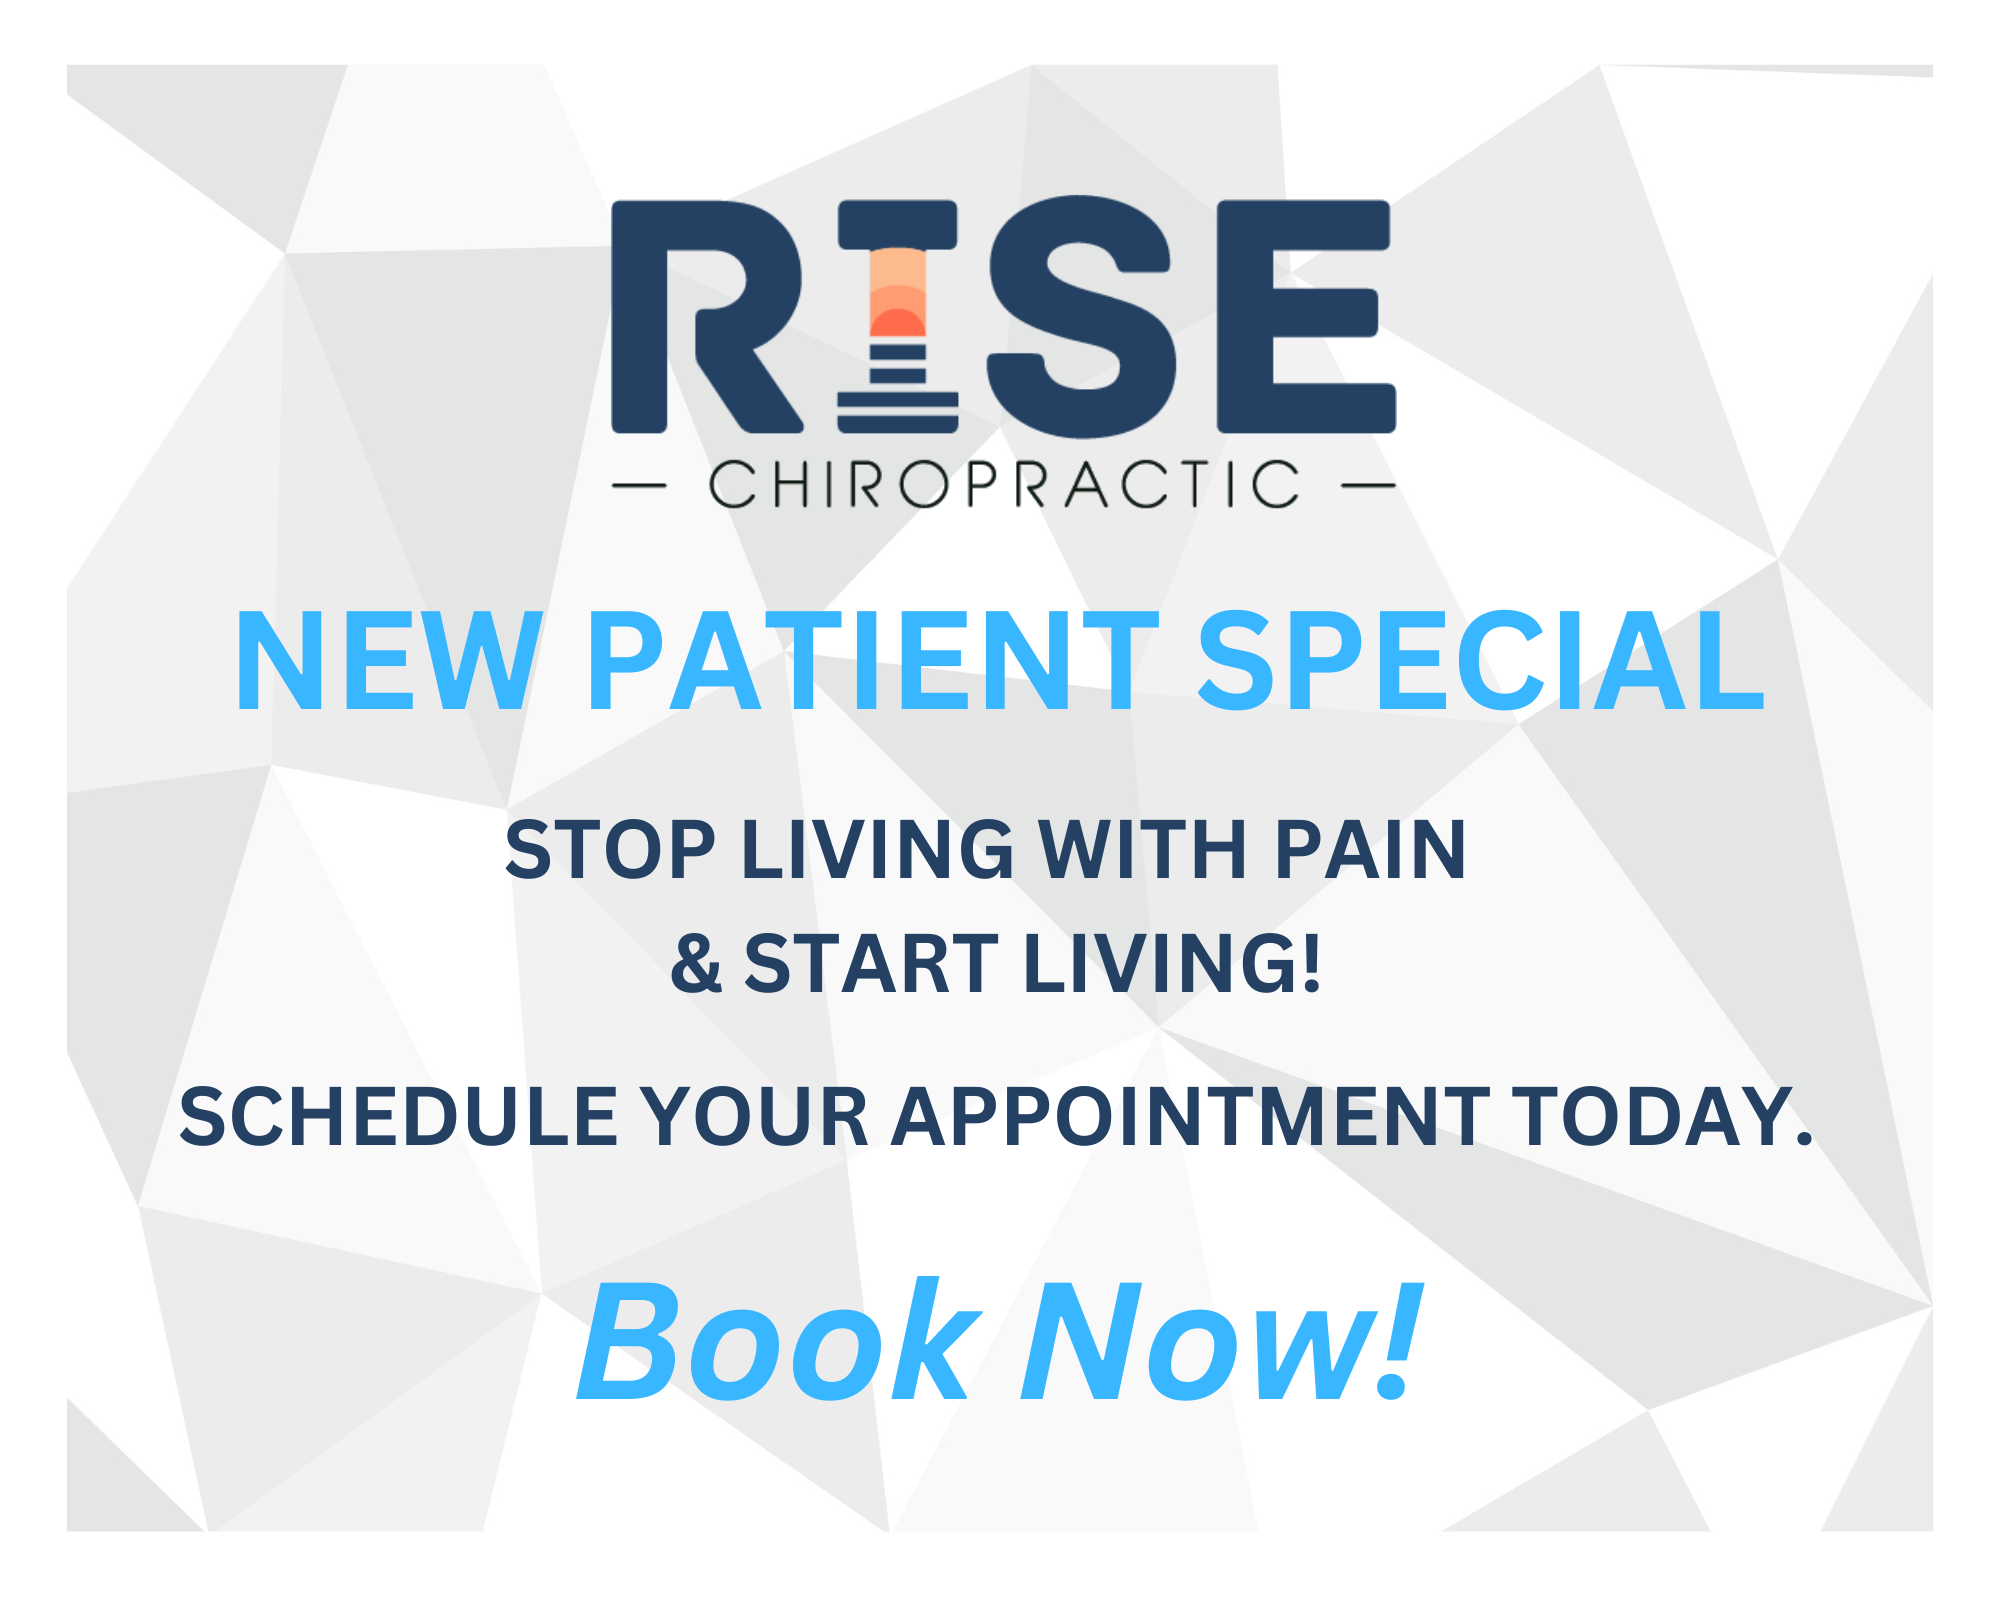 New Patient Special for Rise Chiropractic